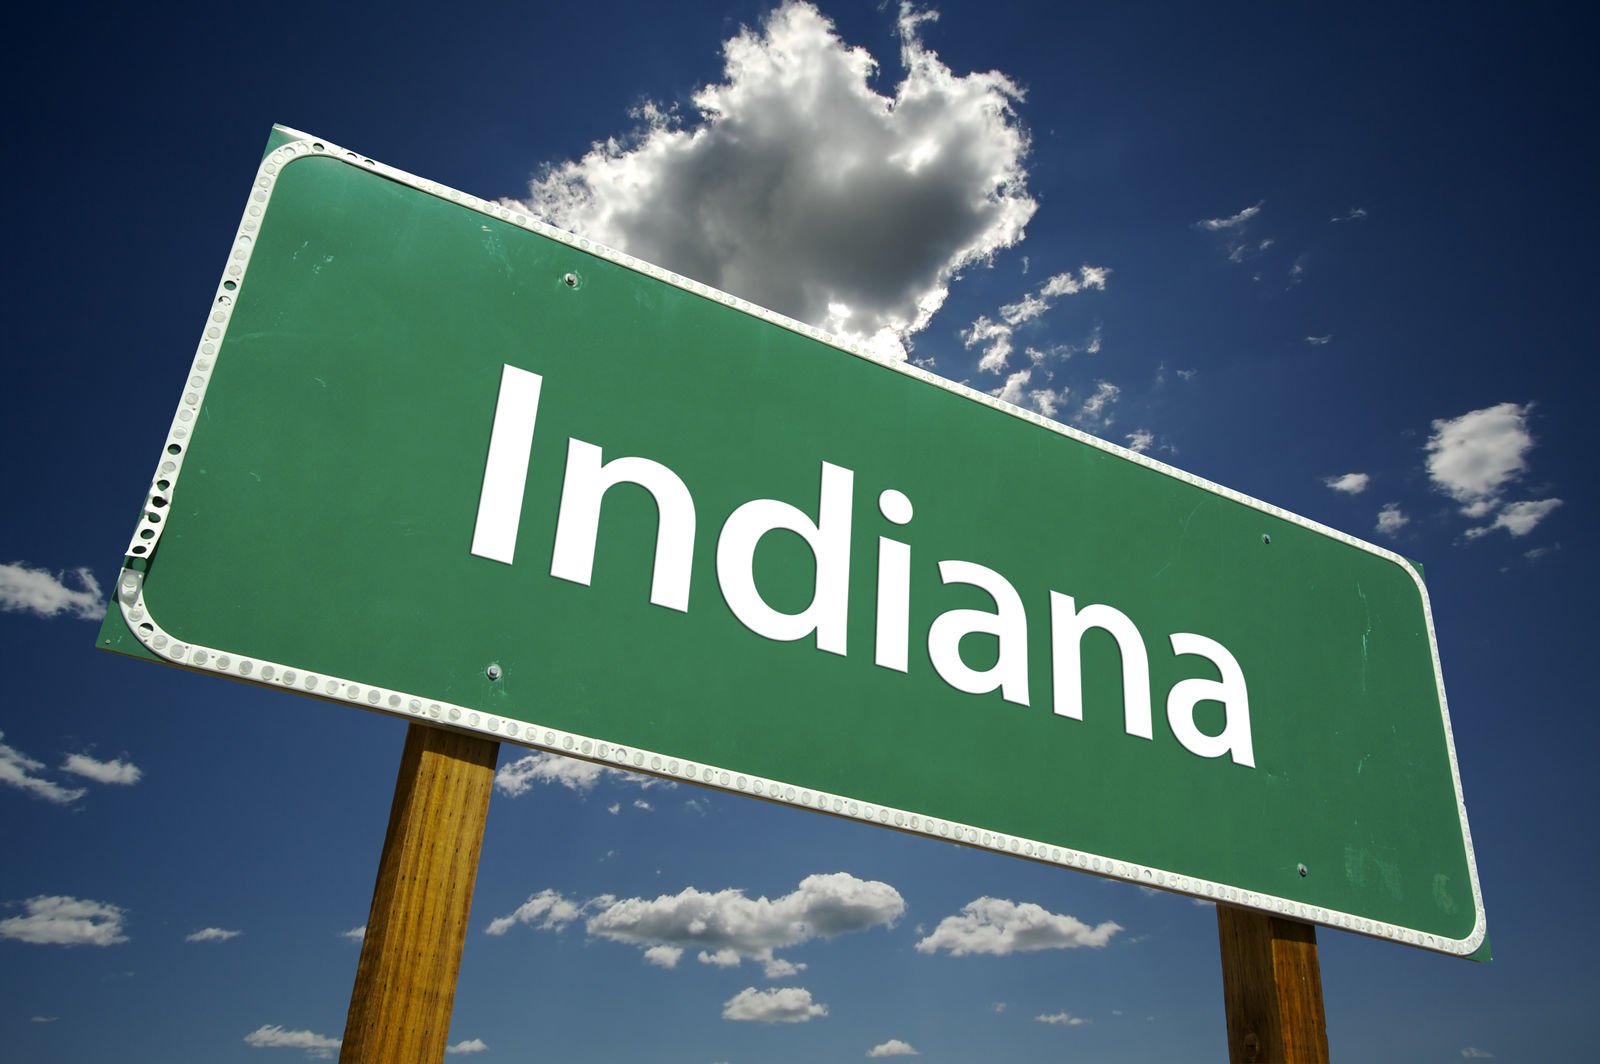 What are state minimums for car insurance in Indiana?